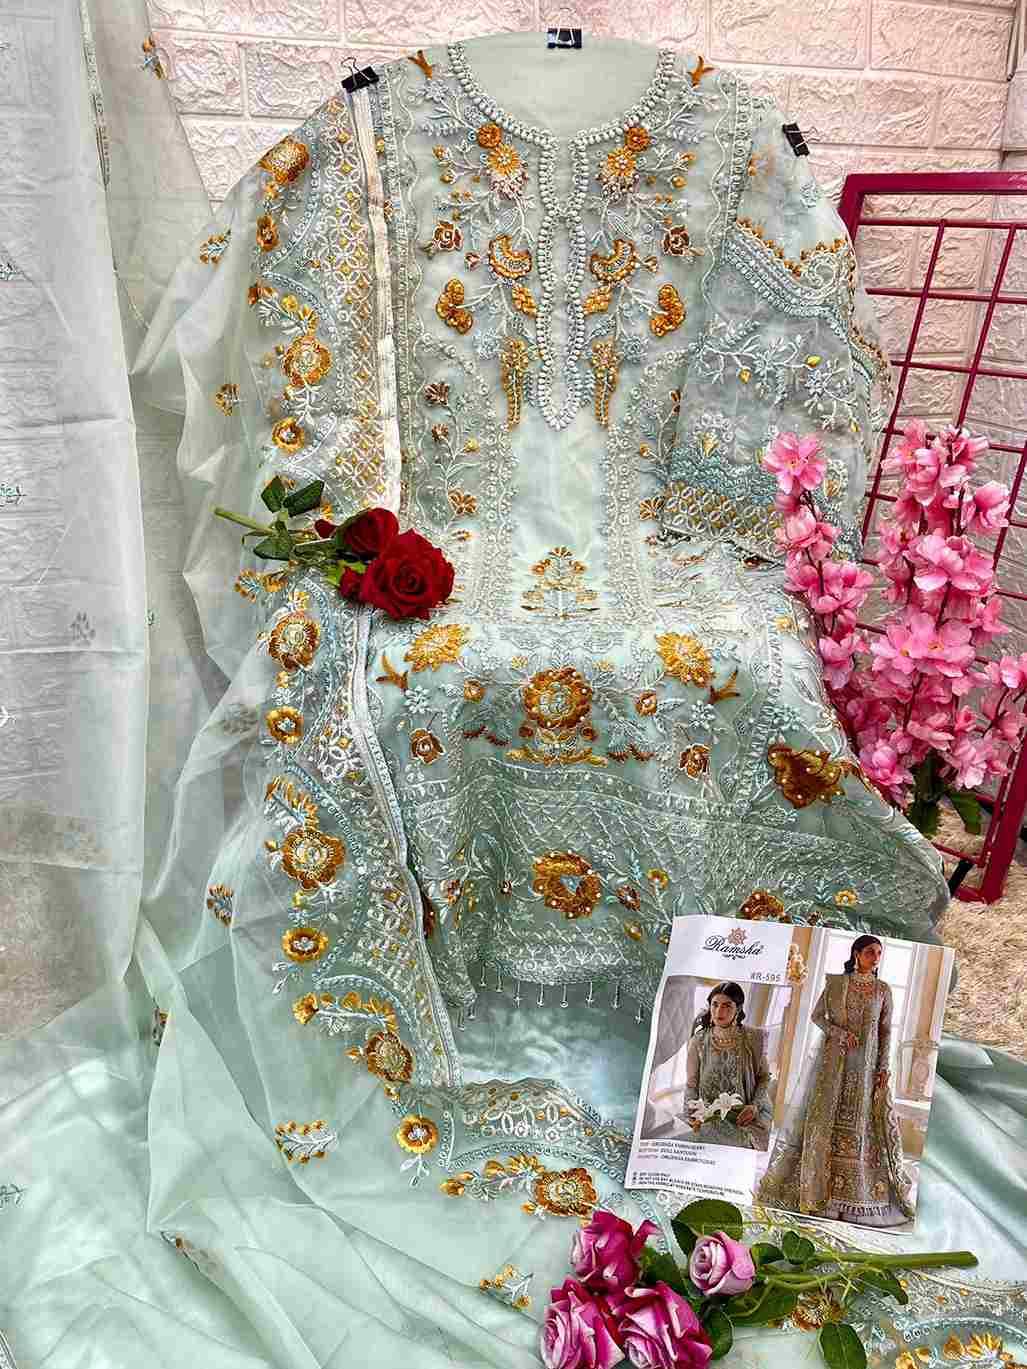 Ramsha Hit Design 595 By Ramsha Beautiful Pakistani Suits Colorful Stylish Fancy Casual Wear & Ethnic Wear Organza Embroidered Dresses At Wholesale Price